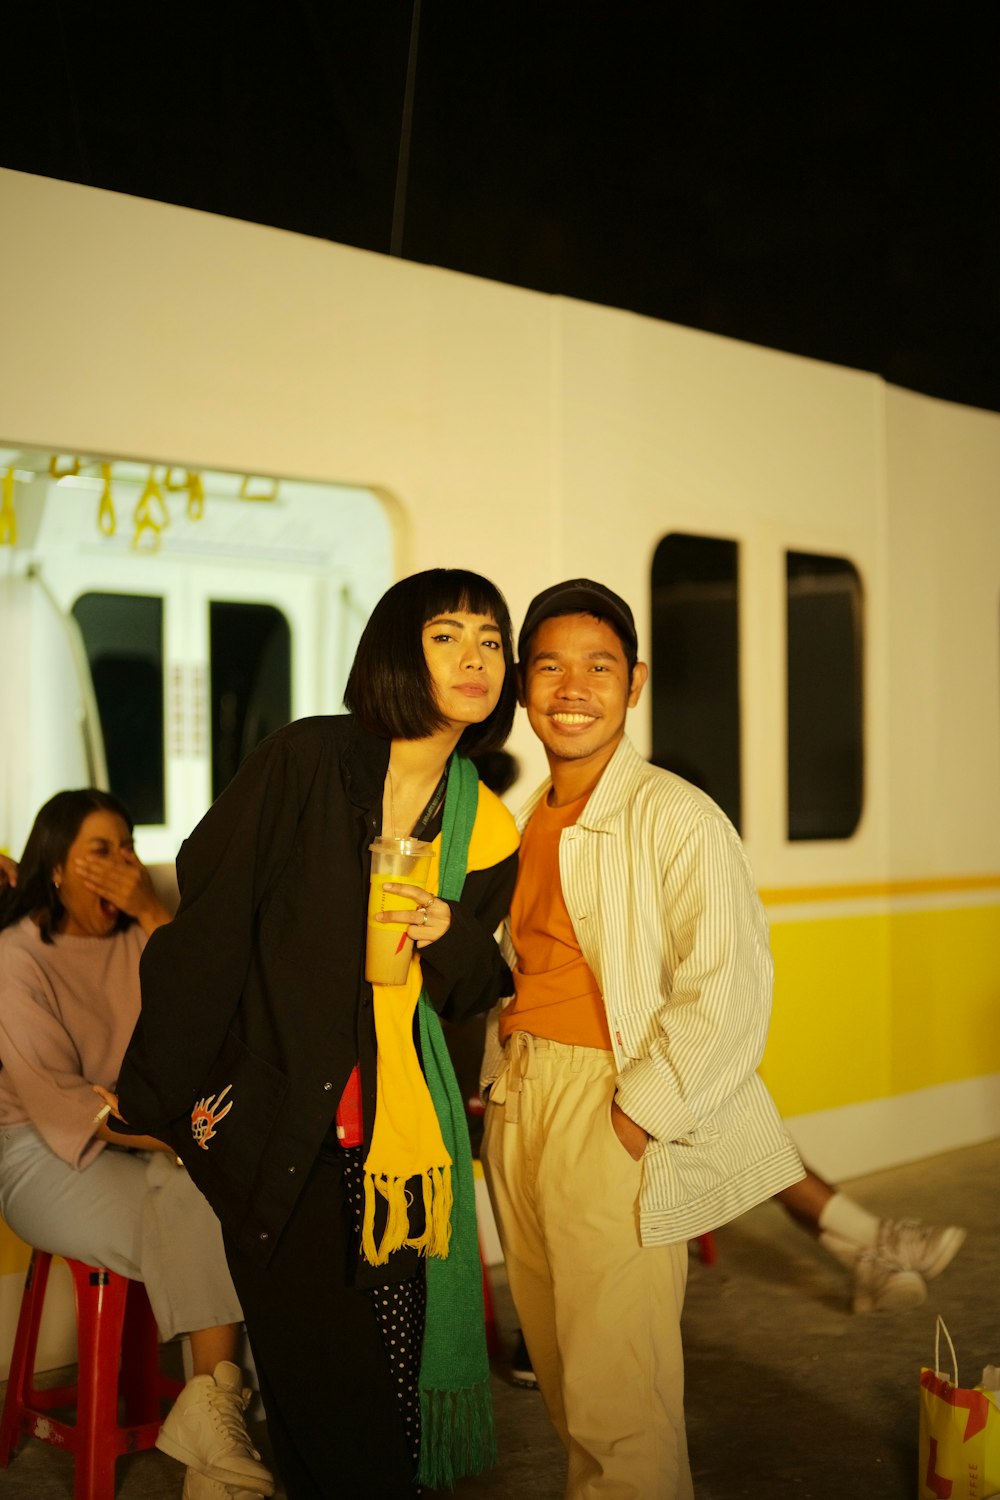 a man and woman standing next to each other in front of a train